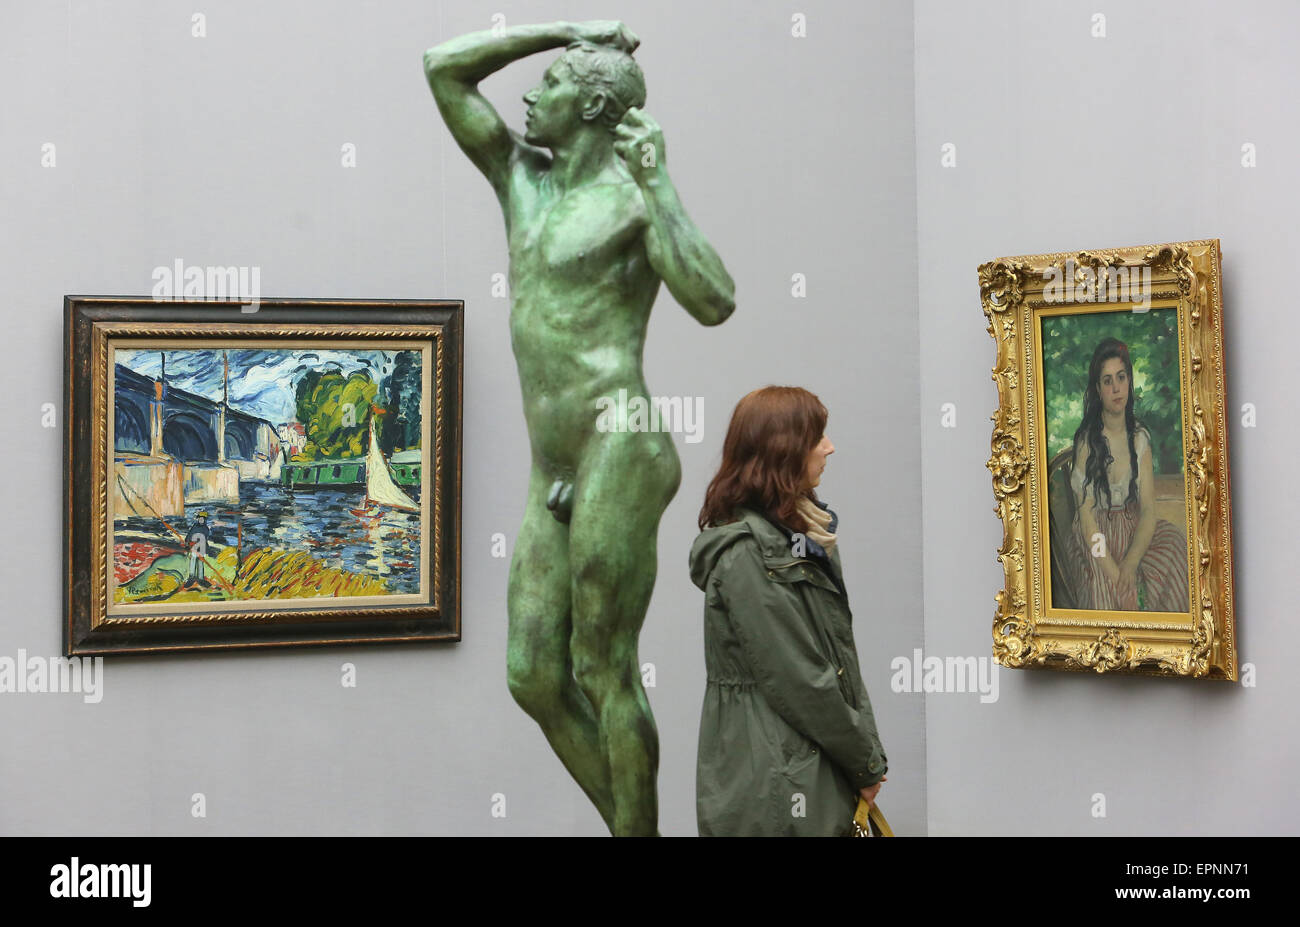 Berlin, Germany. 20th May, 2015. The pictures 'The Bridge at Chatou' (L, 1907)by Maurice de Vlaminck and 'In Summer' (1868) by Auguste Renoir can be seen next to the sculpture 'The Bronze Age' (1875/6) by Auguste Rodin at the Alte Nationalgalerie in Berlin, Germany, 20 May 2015. The pieces are part of the exhibition 'Impressionism - Expressionism. Turning Point in Art' - on display until 20 September 2015. Photo: STEPHANIE PILICK/dpa/Alamy Live News Stock Photo